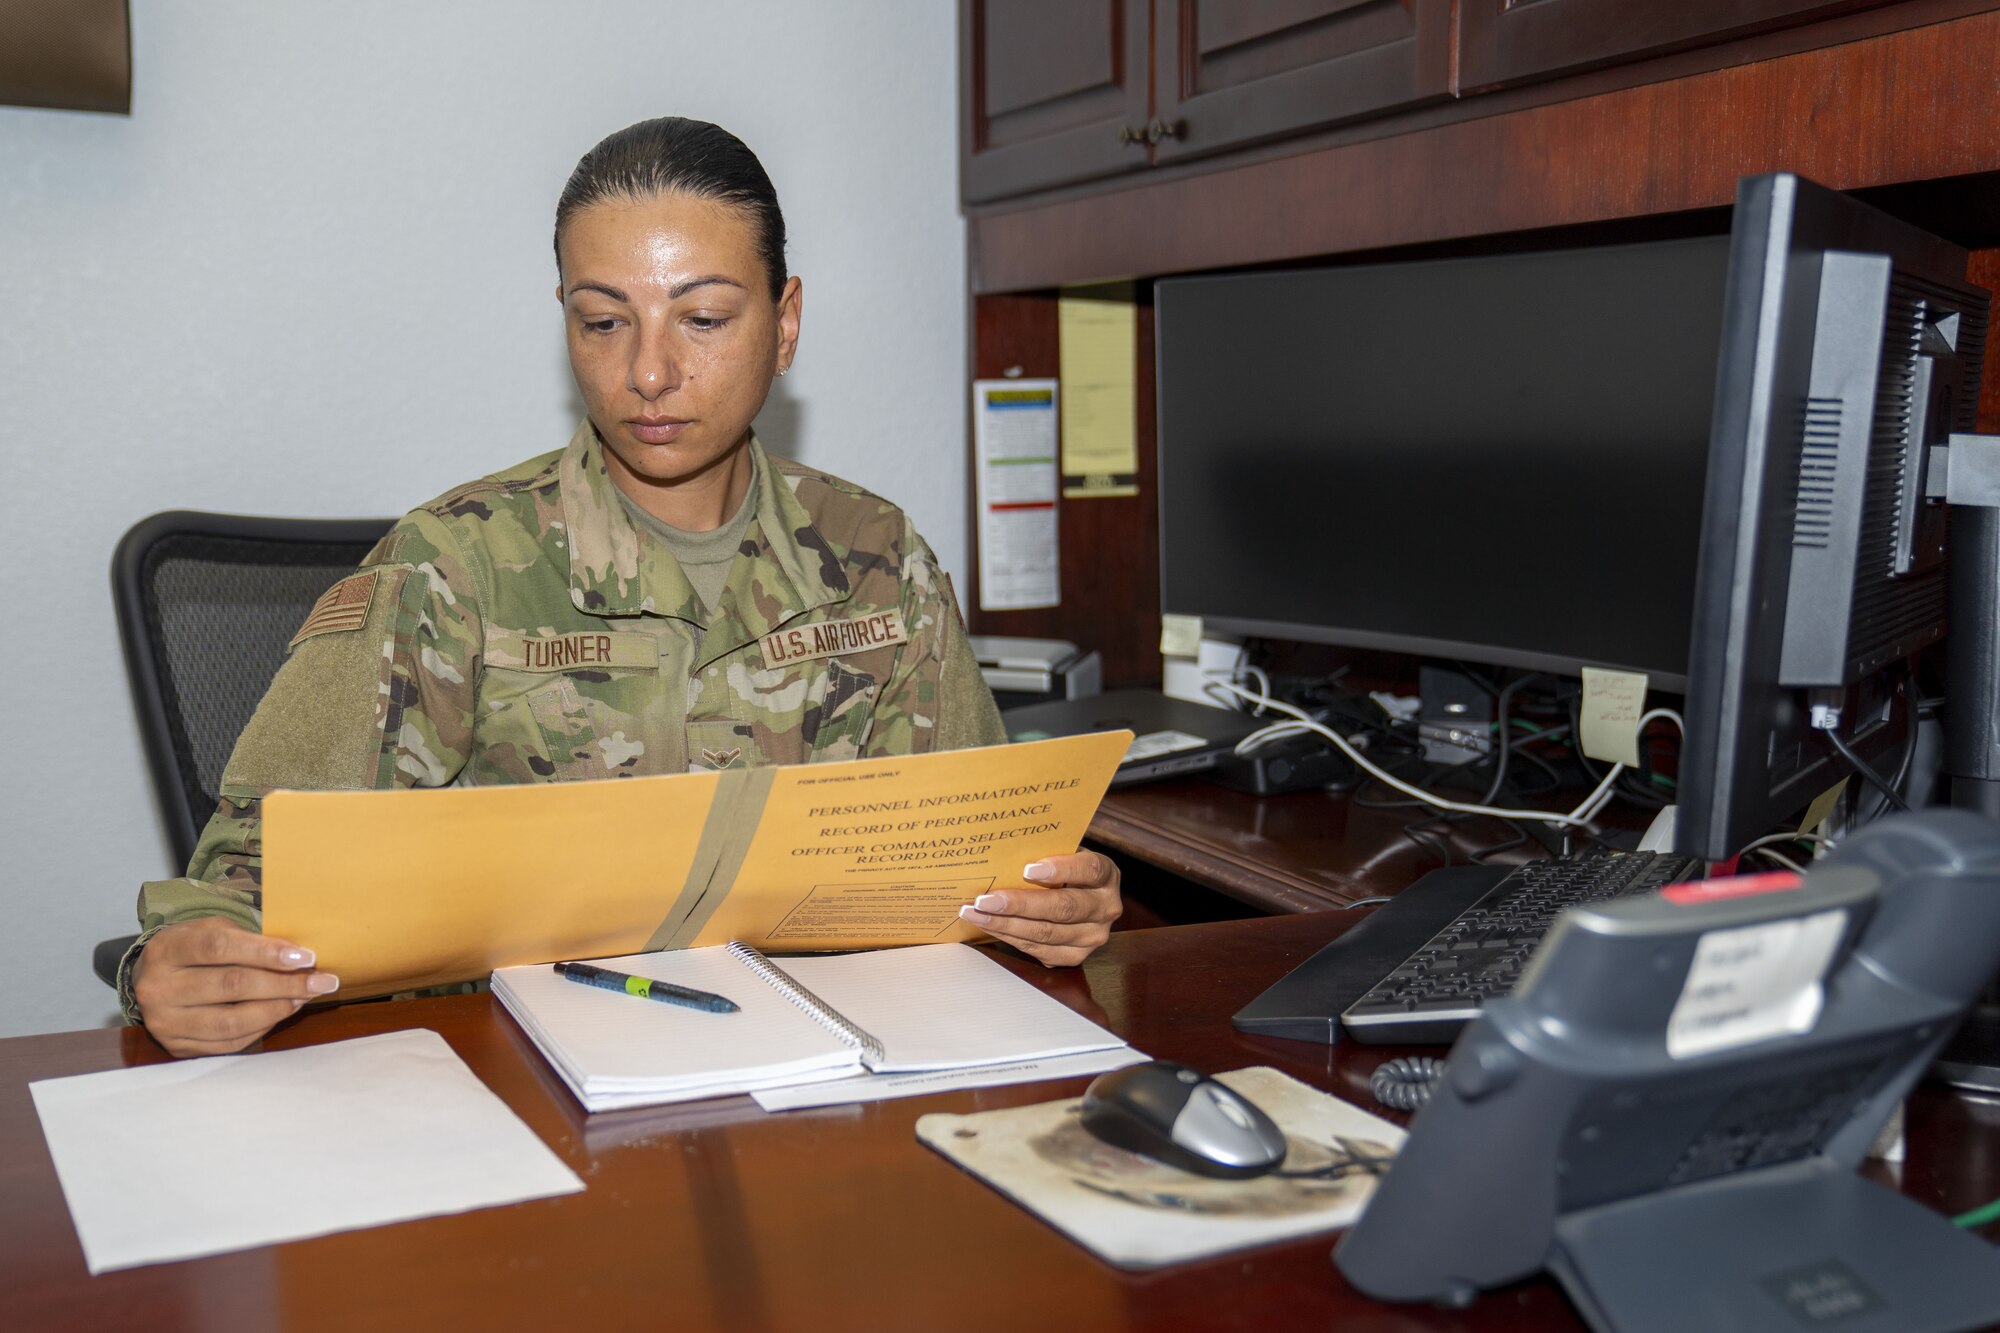 U.S. Air Force Airman 1st Class Gordana Turner, 335th Training Squadron student, reviews paperwork at the Sablich Center on Keesler Air Force Base, Mississippi, March 15, 2022. Turner took part in the Skills Enhancing Development Program, which allows Airmen who have graduated technical training the opportunity to work in their career field's local squadron, while waiting to leave for their first duty station. (U.S. Air Force photo by Senior Airman Kimberly L. Mueller)